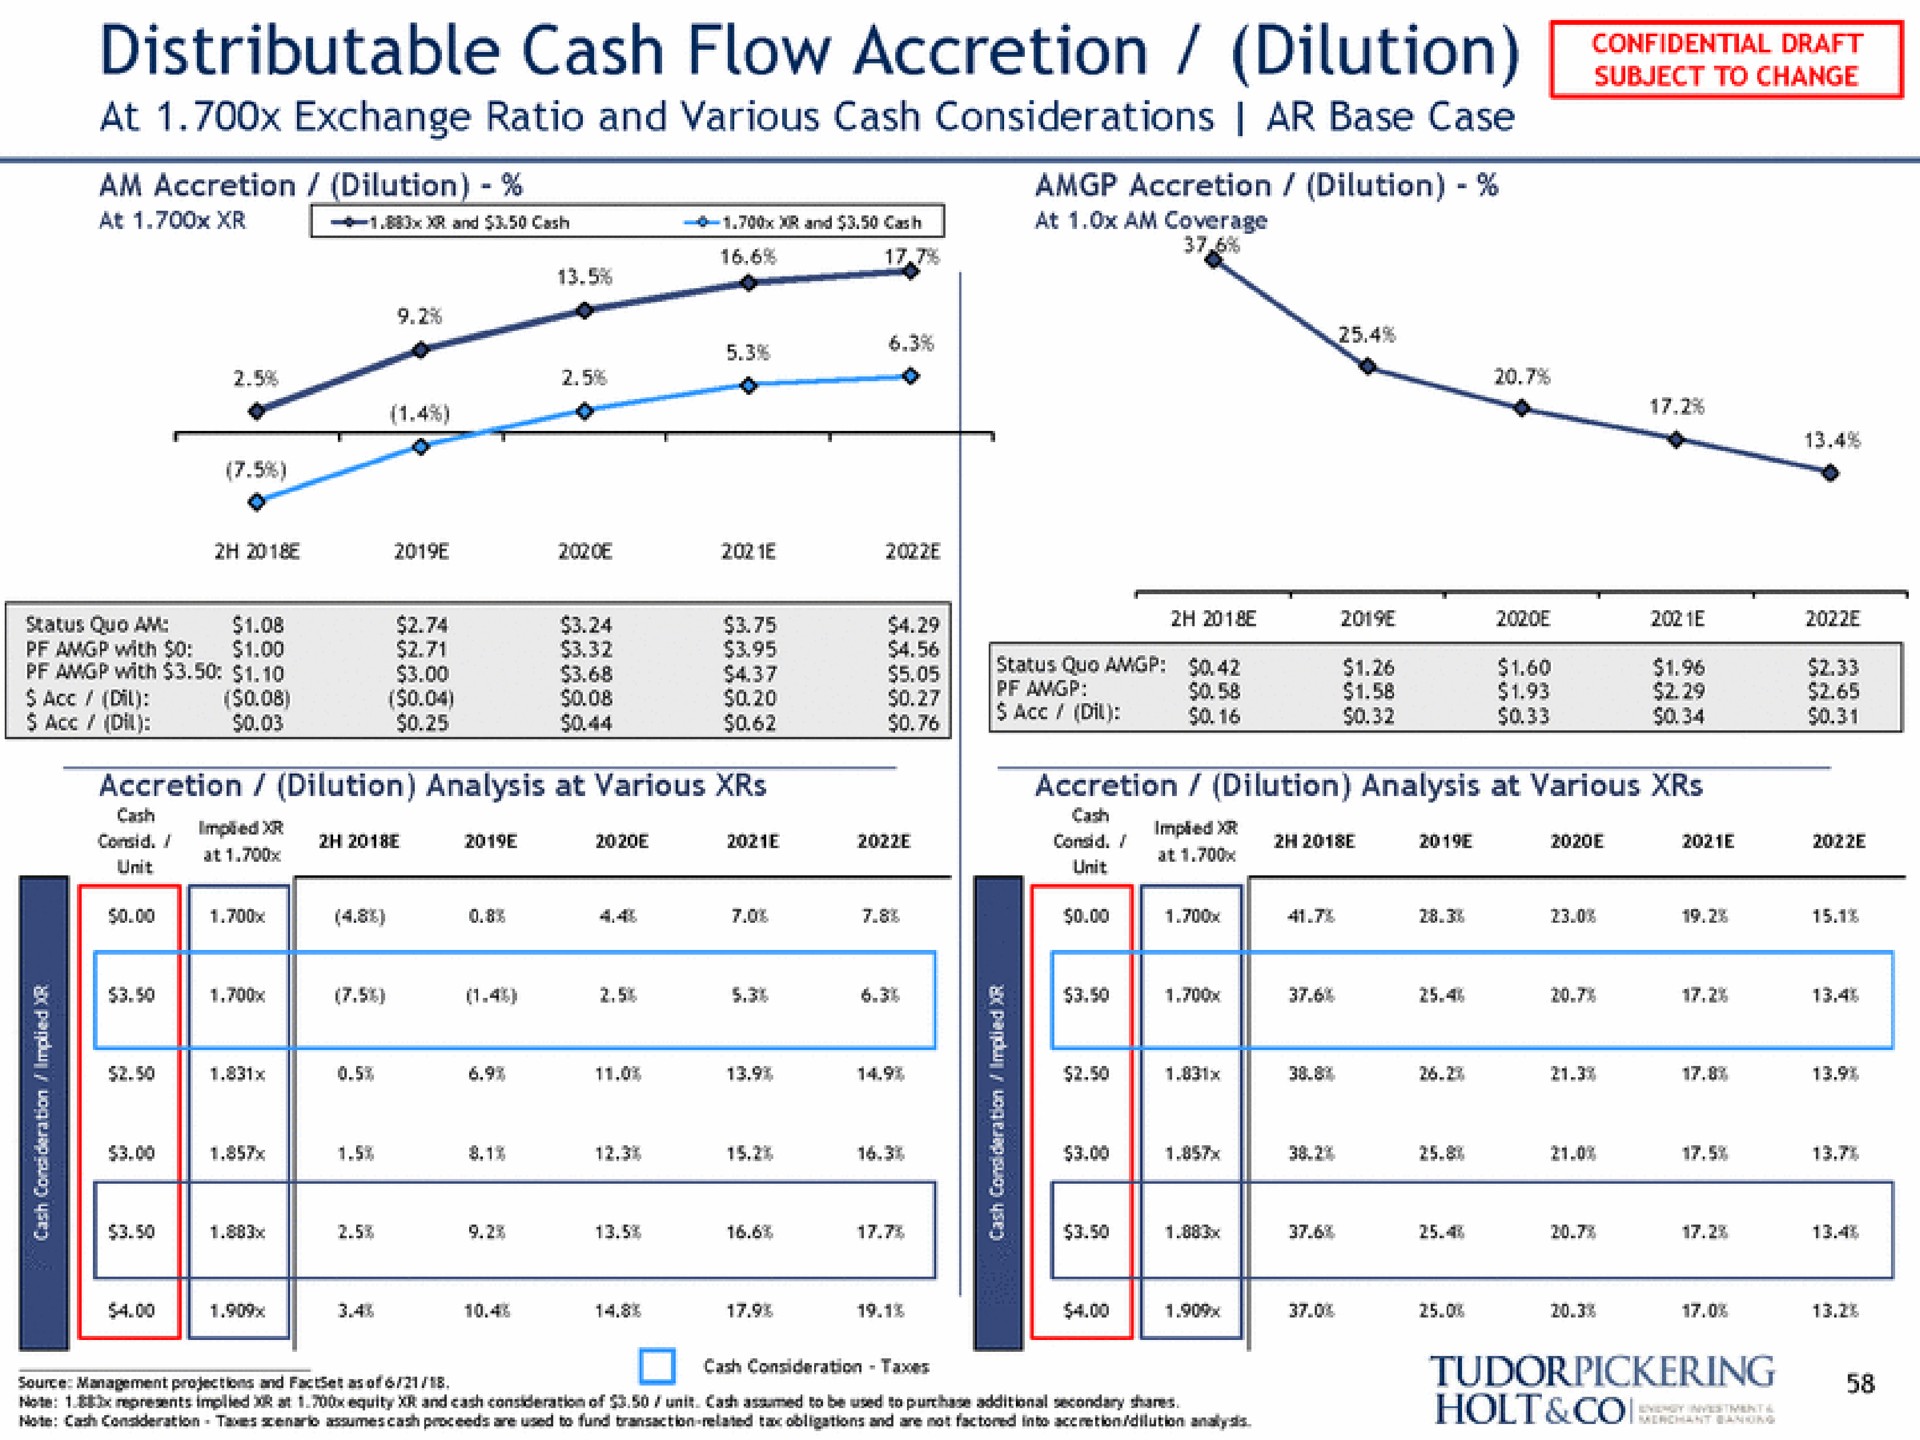 distributable cash flow accretion dilution ratio and various cash considerations base case at i toe | Tudor, Pickering, Holt & Co